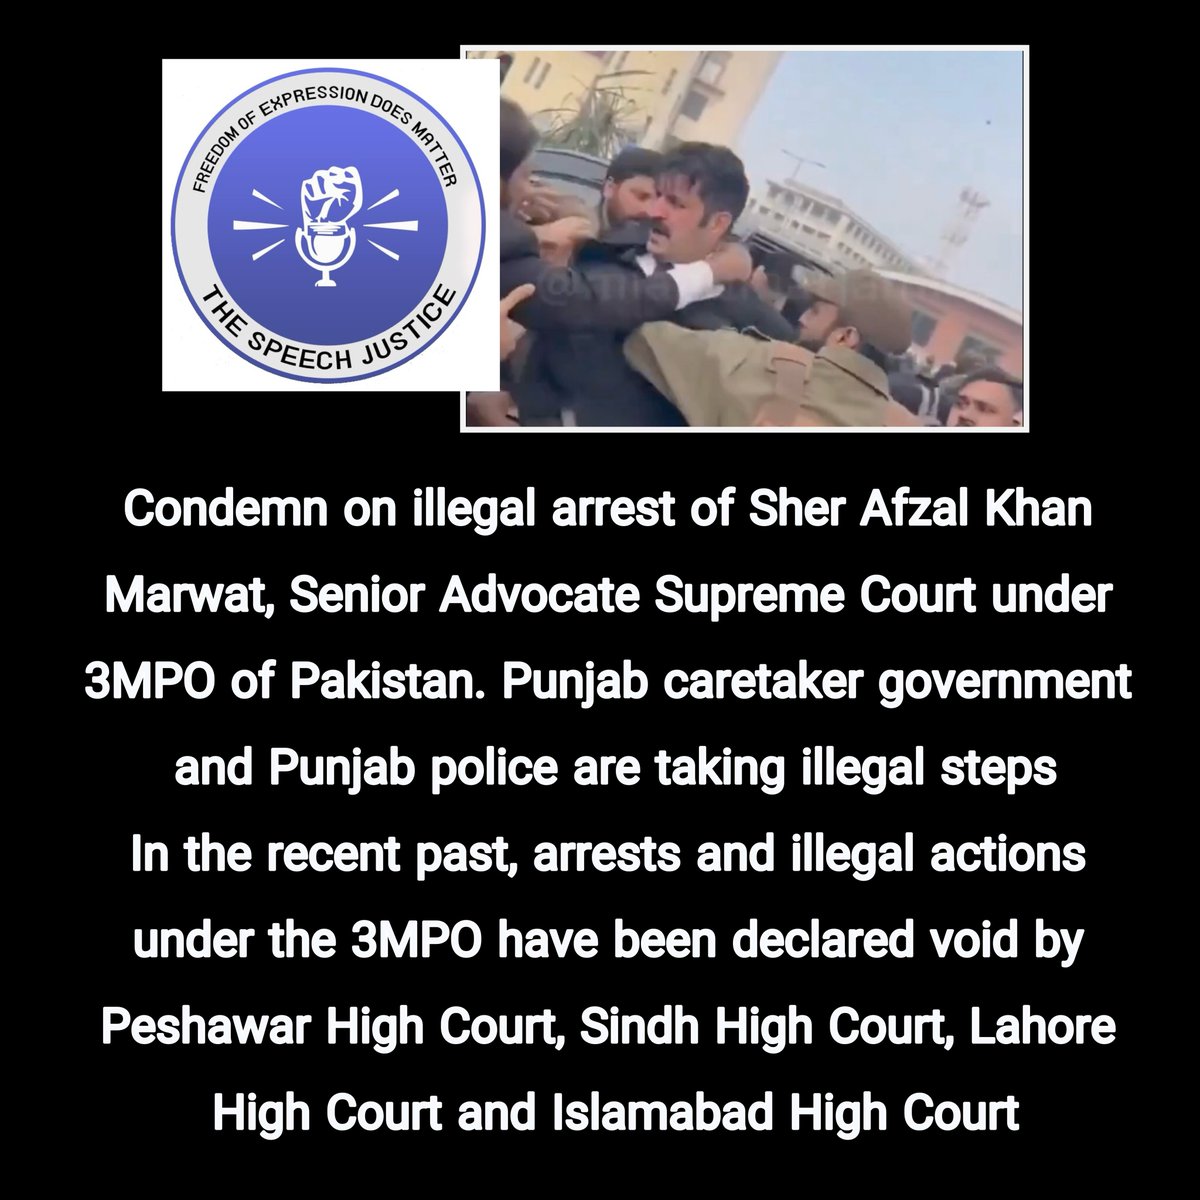 Condemn on illegal arrest of Sher Afzal Khan Marwat, Senior Advocate Supreme Court under 3MPO of Pakistan. Punjab caretaker government and Punjab police are taking illegal steps. #ReleaseSherAfzalMarwat